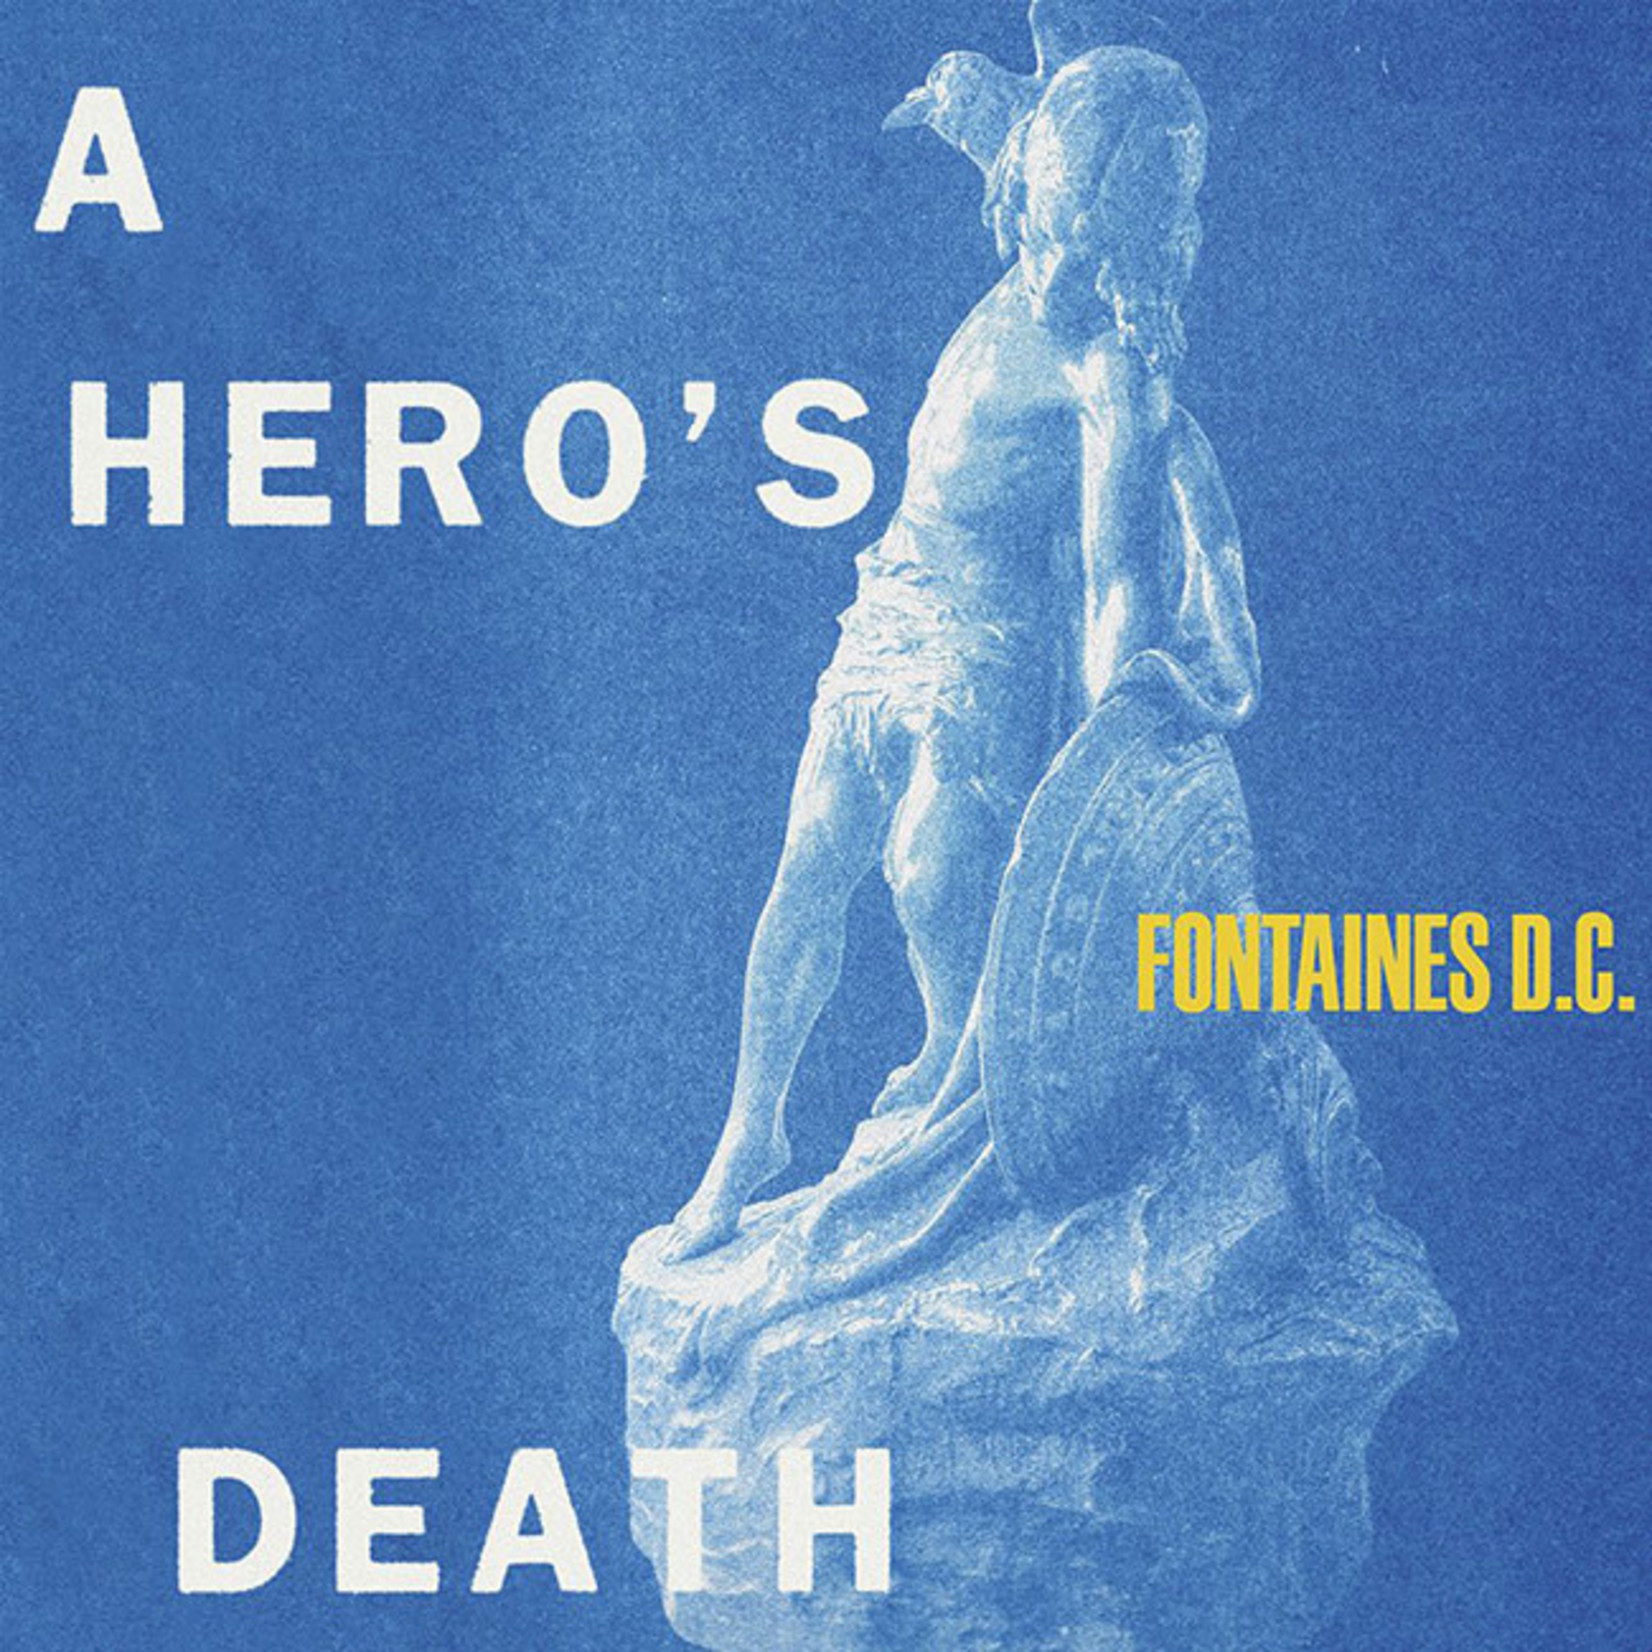 [New] Fontaines D.C. - A Hero's Death